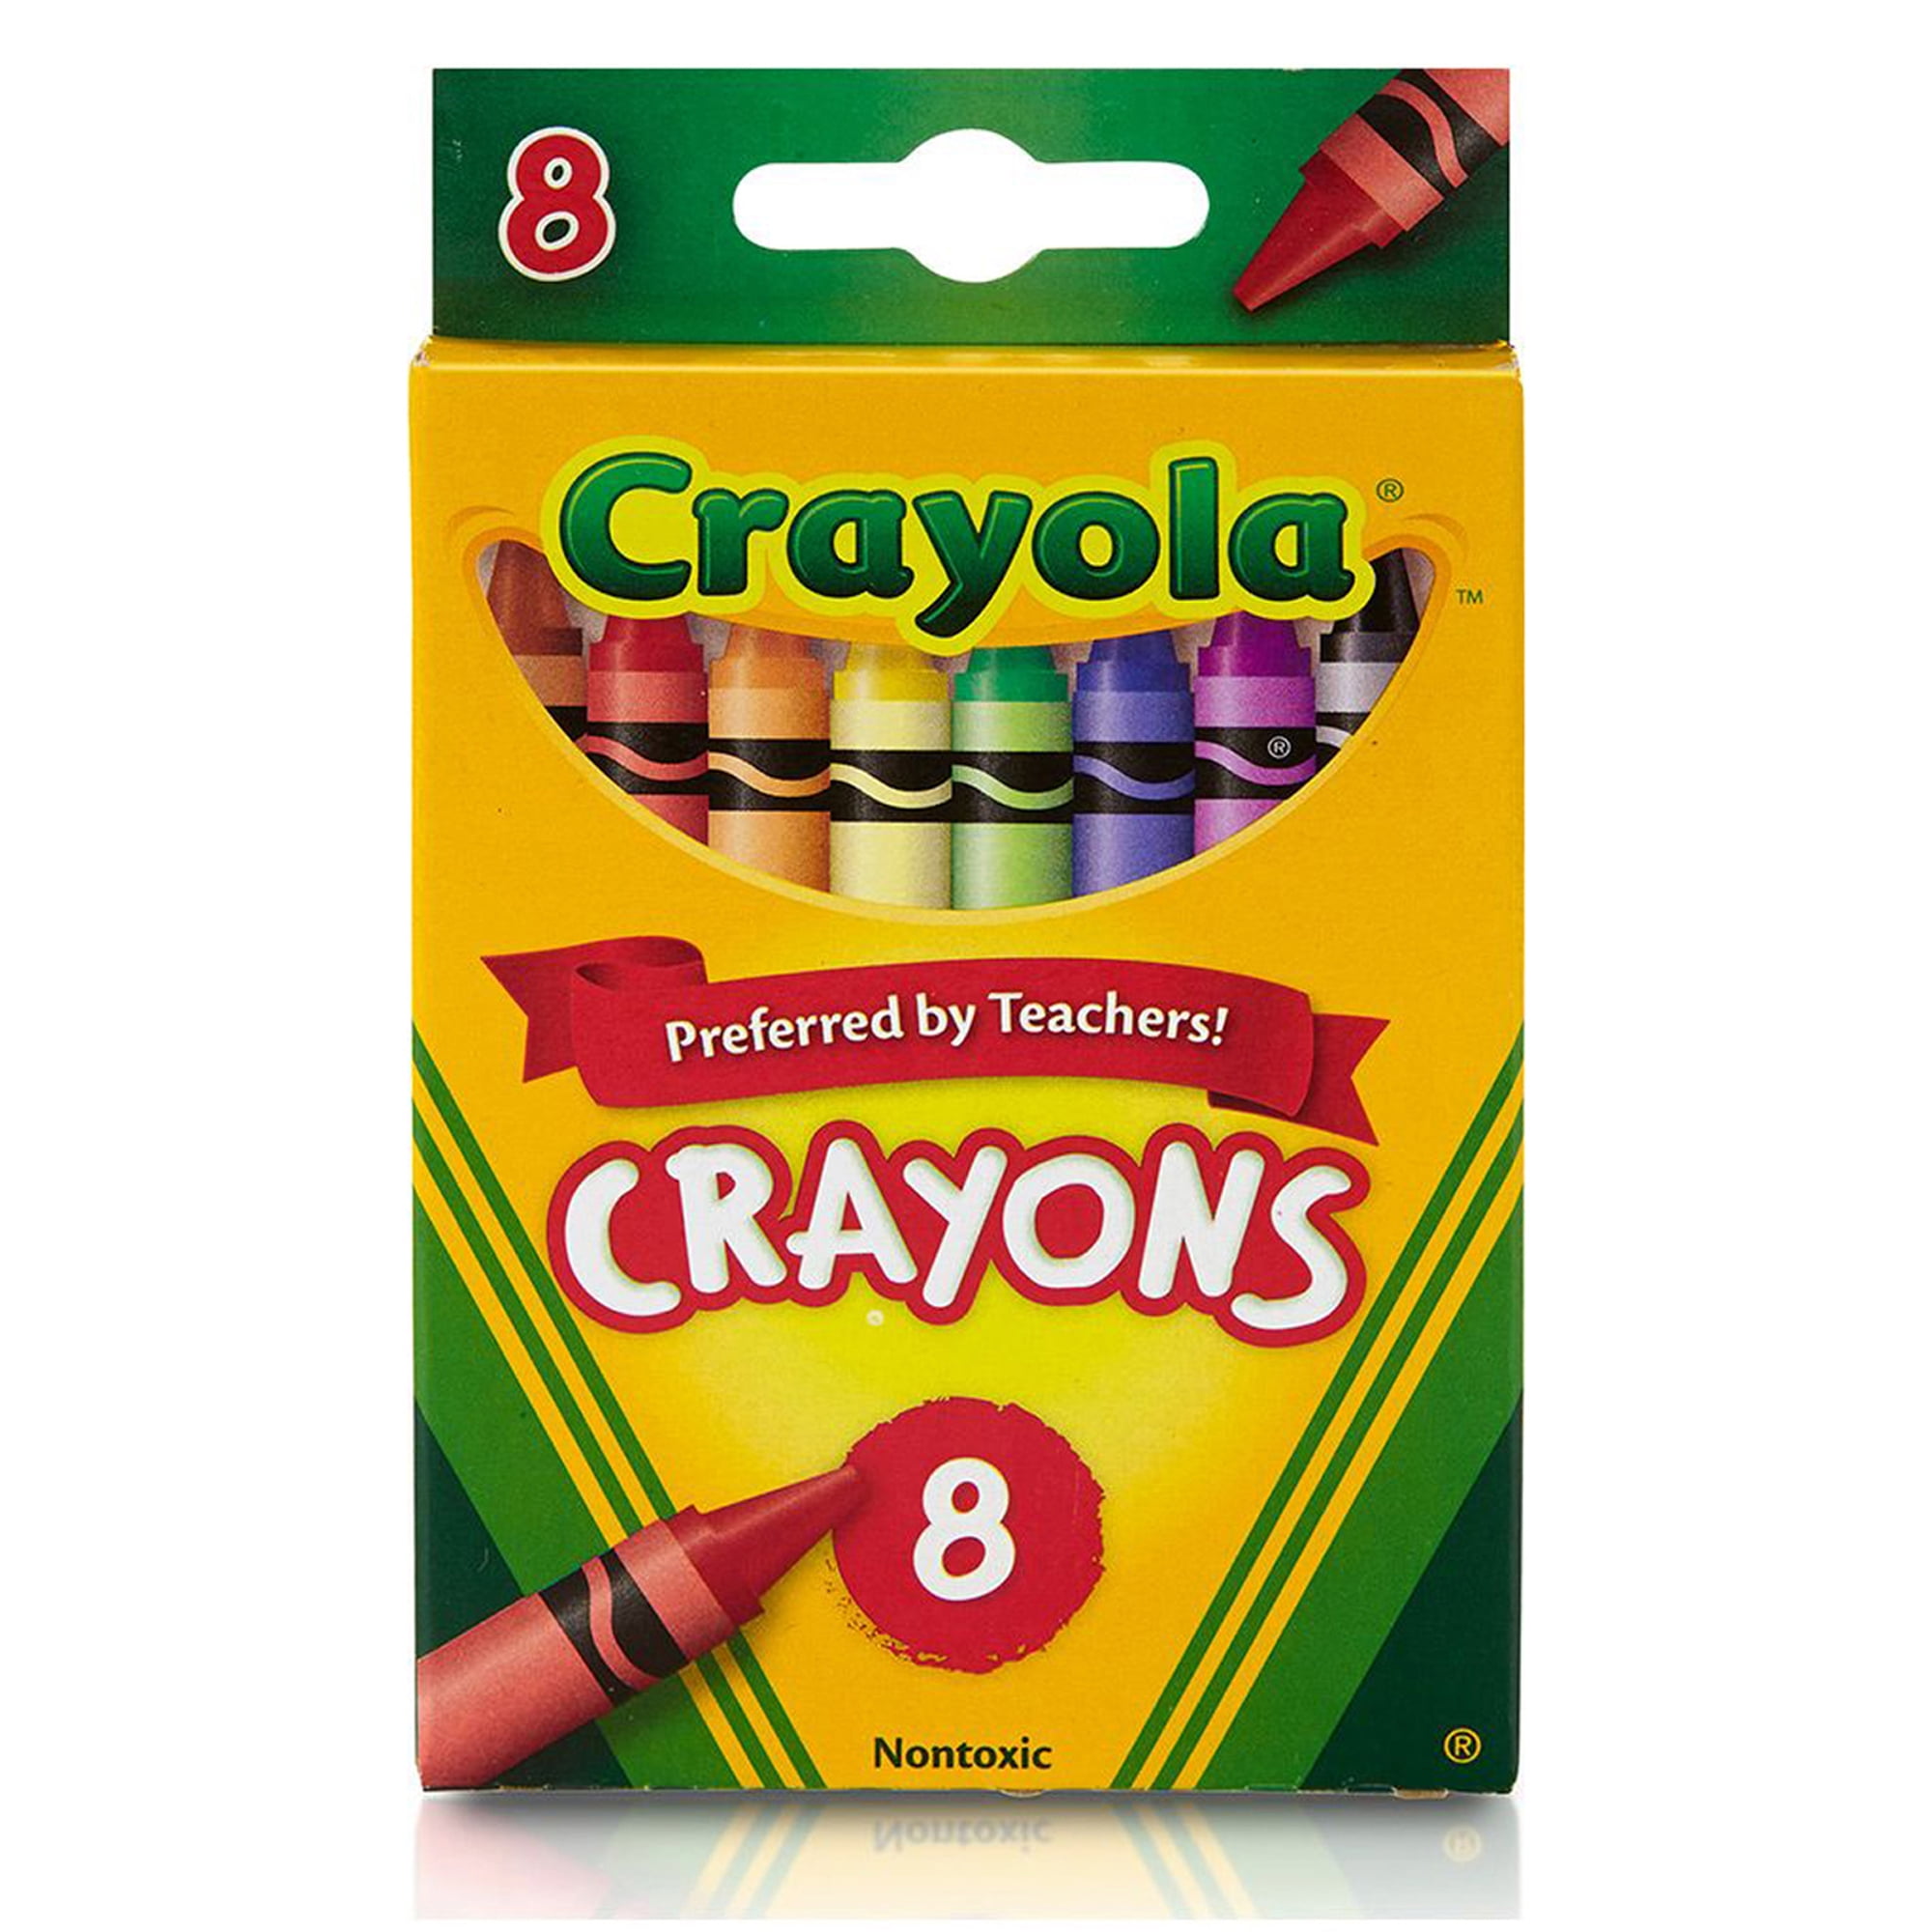 30 Boxes Of Crayola Kids Color Crayons 24 Count Preferred By Teachers Brand New 